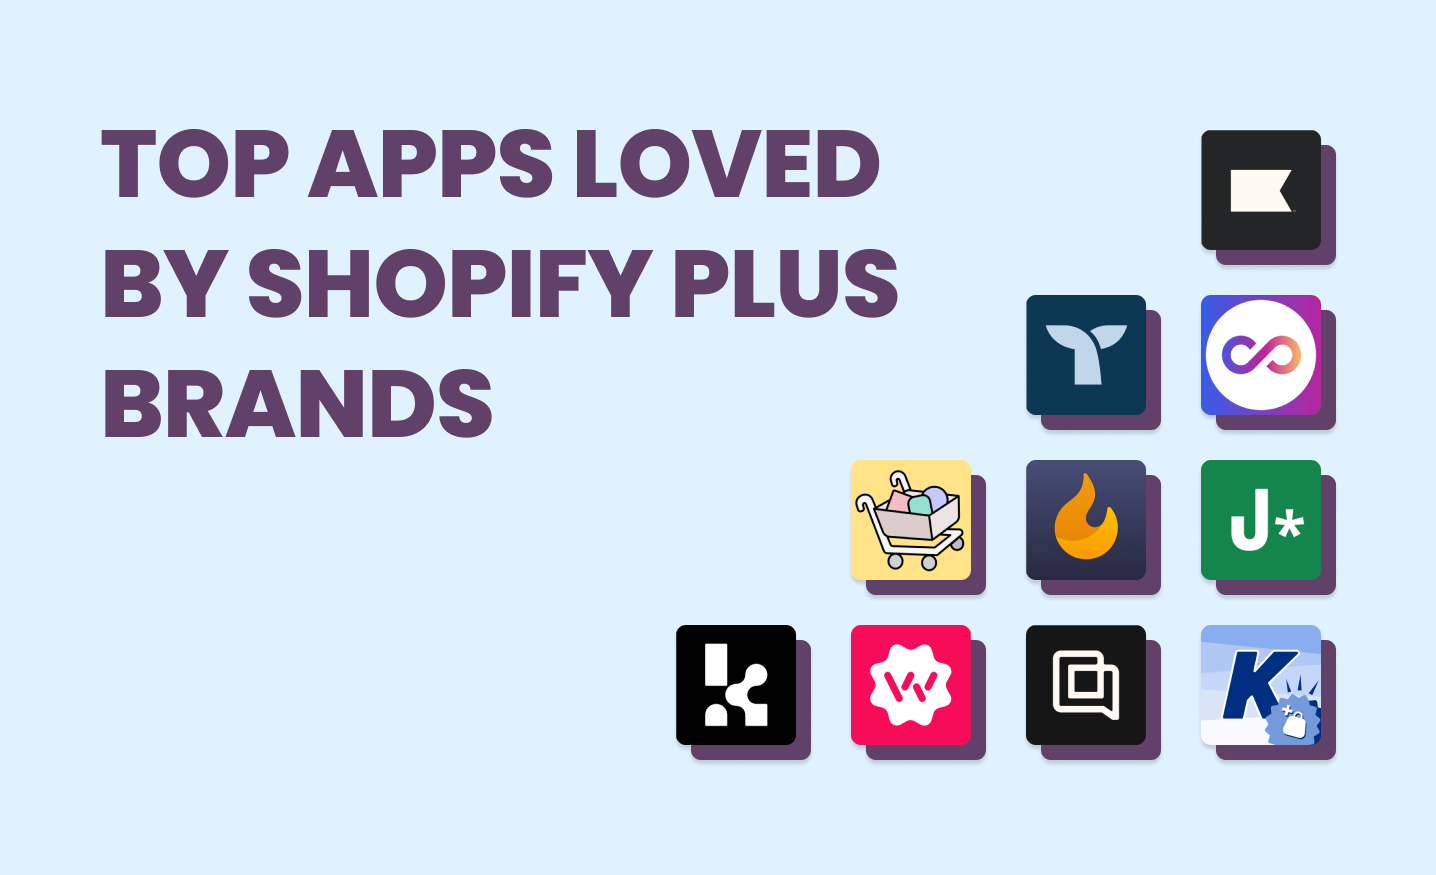 Shopify Plus with Dynamic Yield Personalization